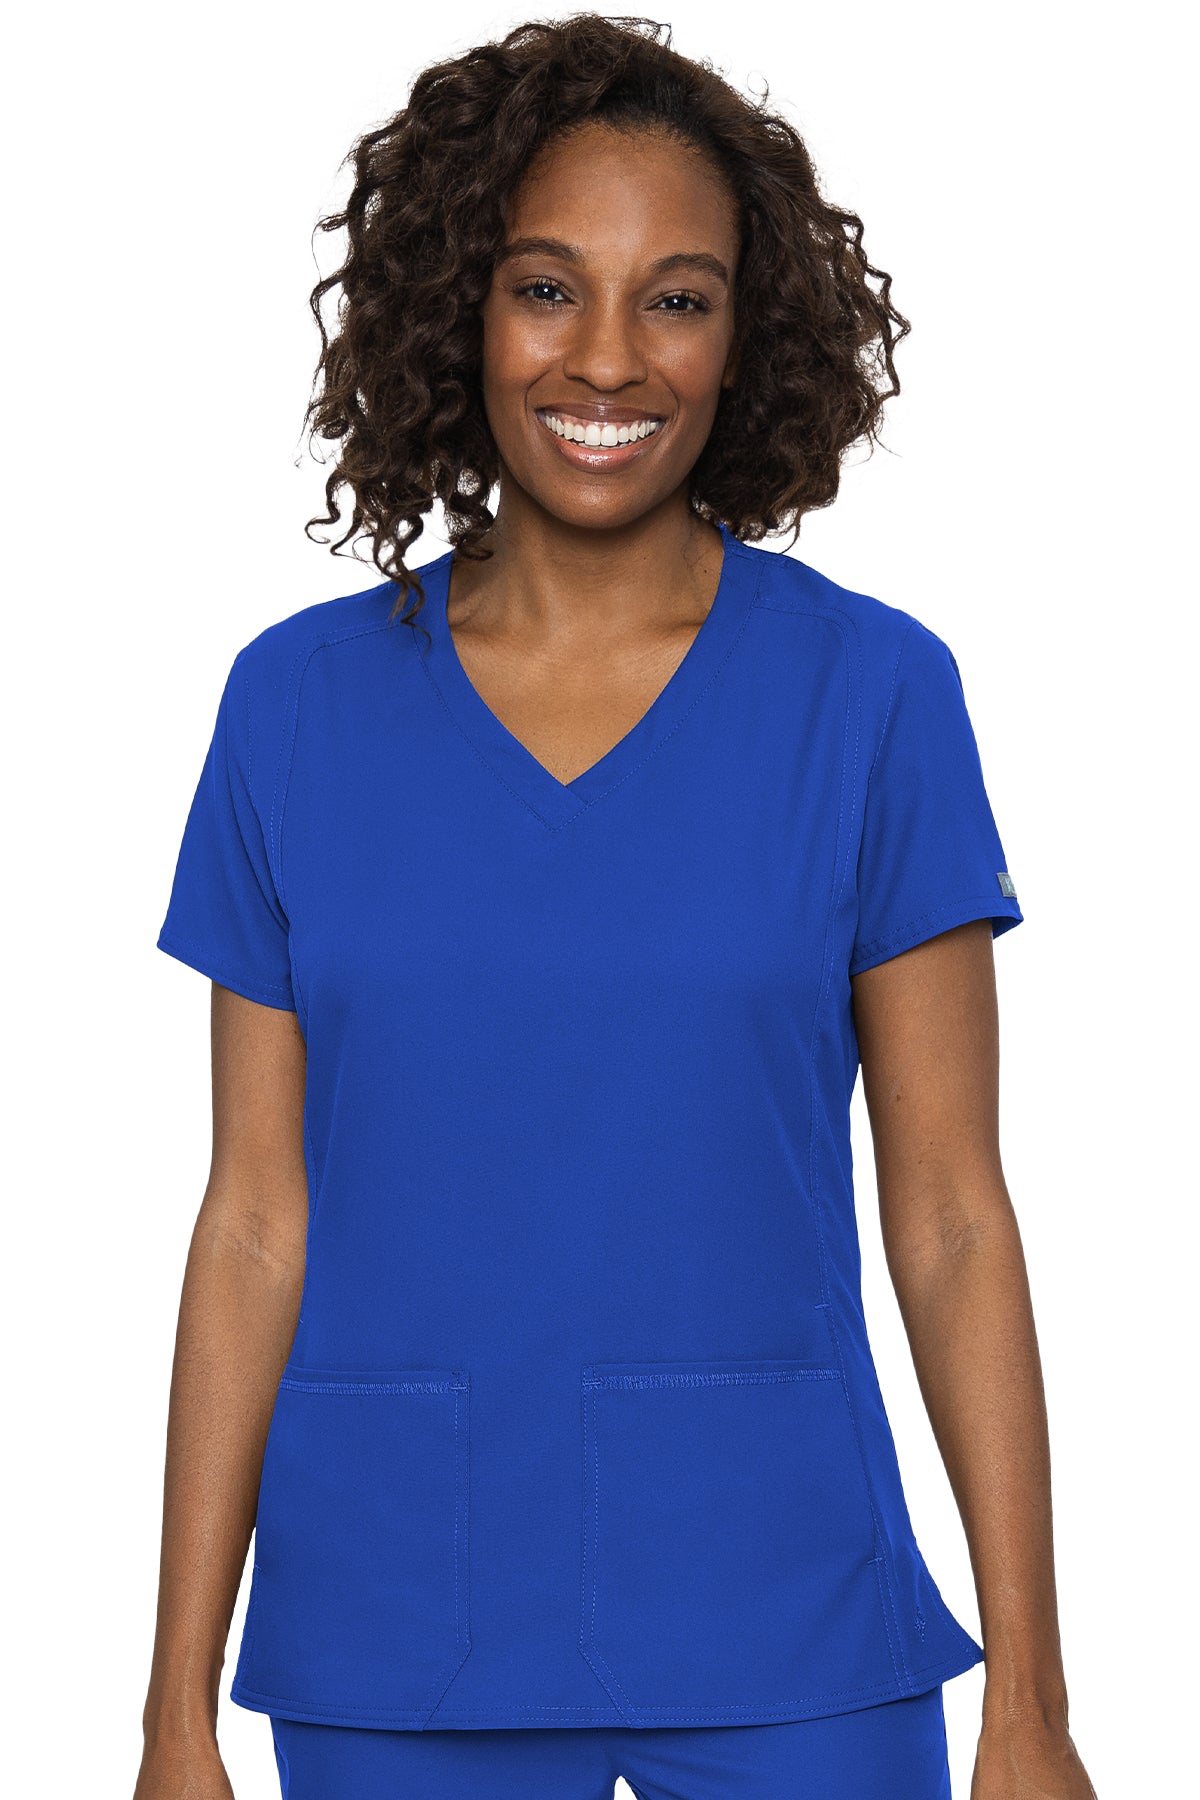 Med Couture Scrub Top Insight Classic V-Neck Side Pocket in Royal at Parker's Clothing and Shoes.